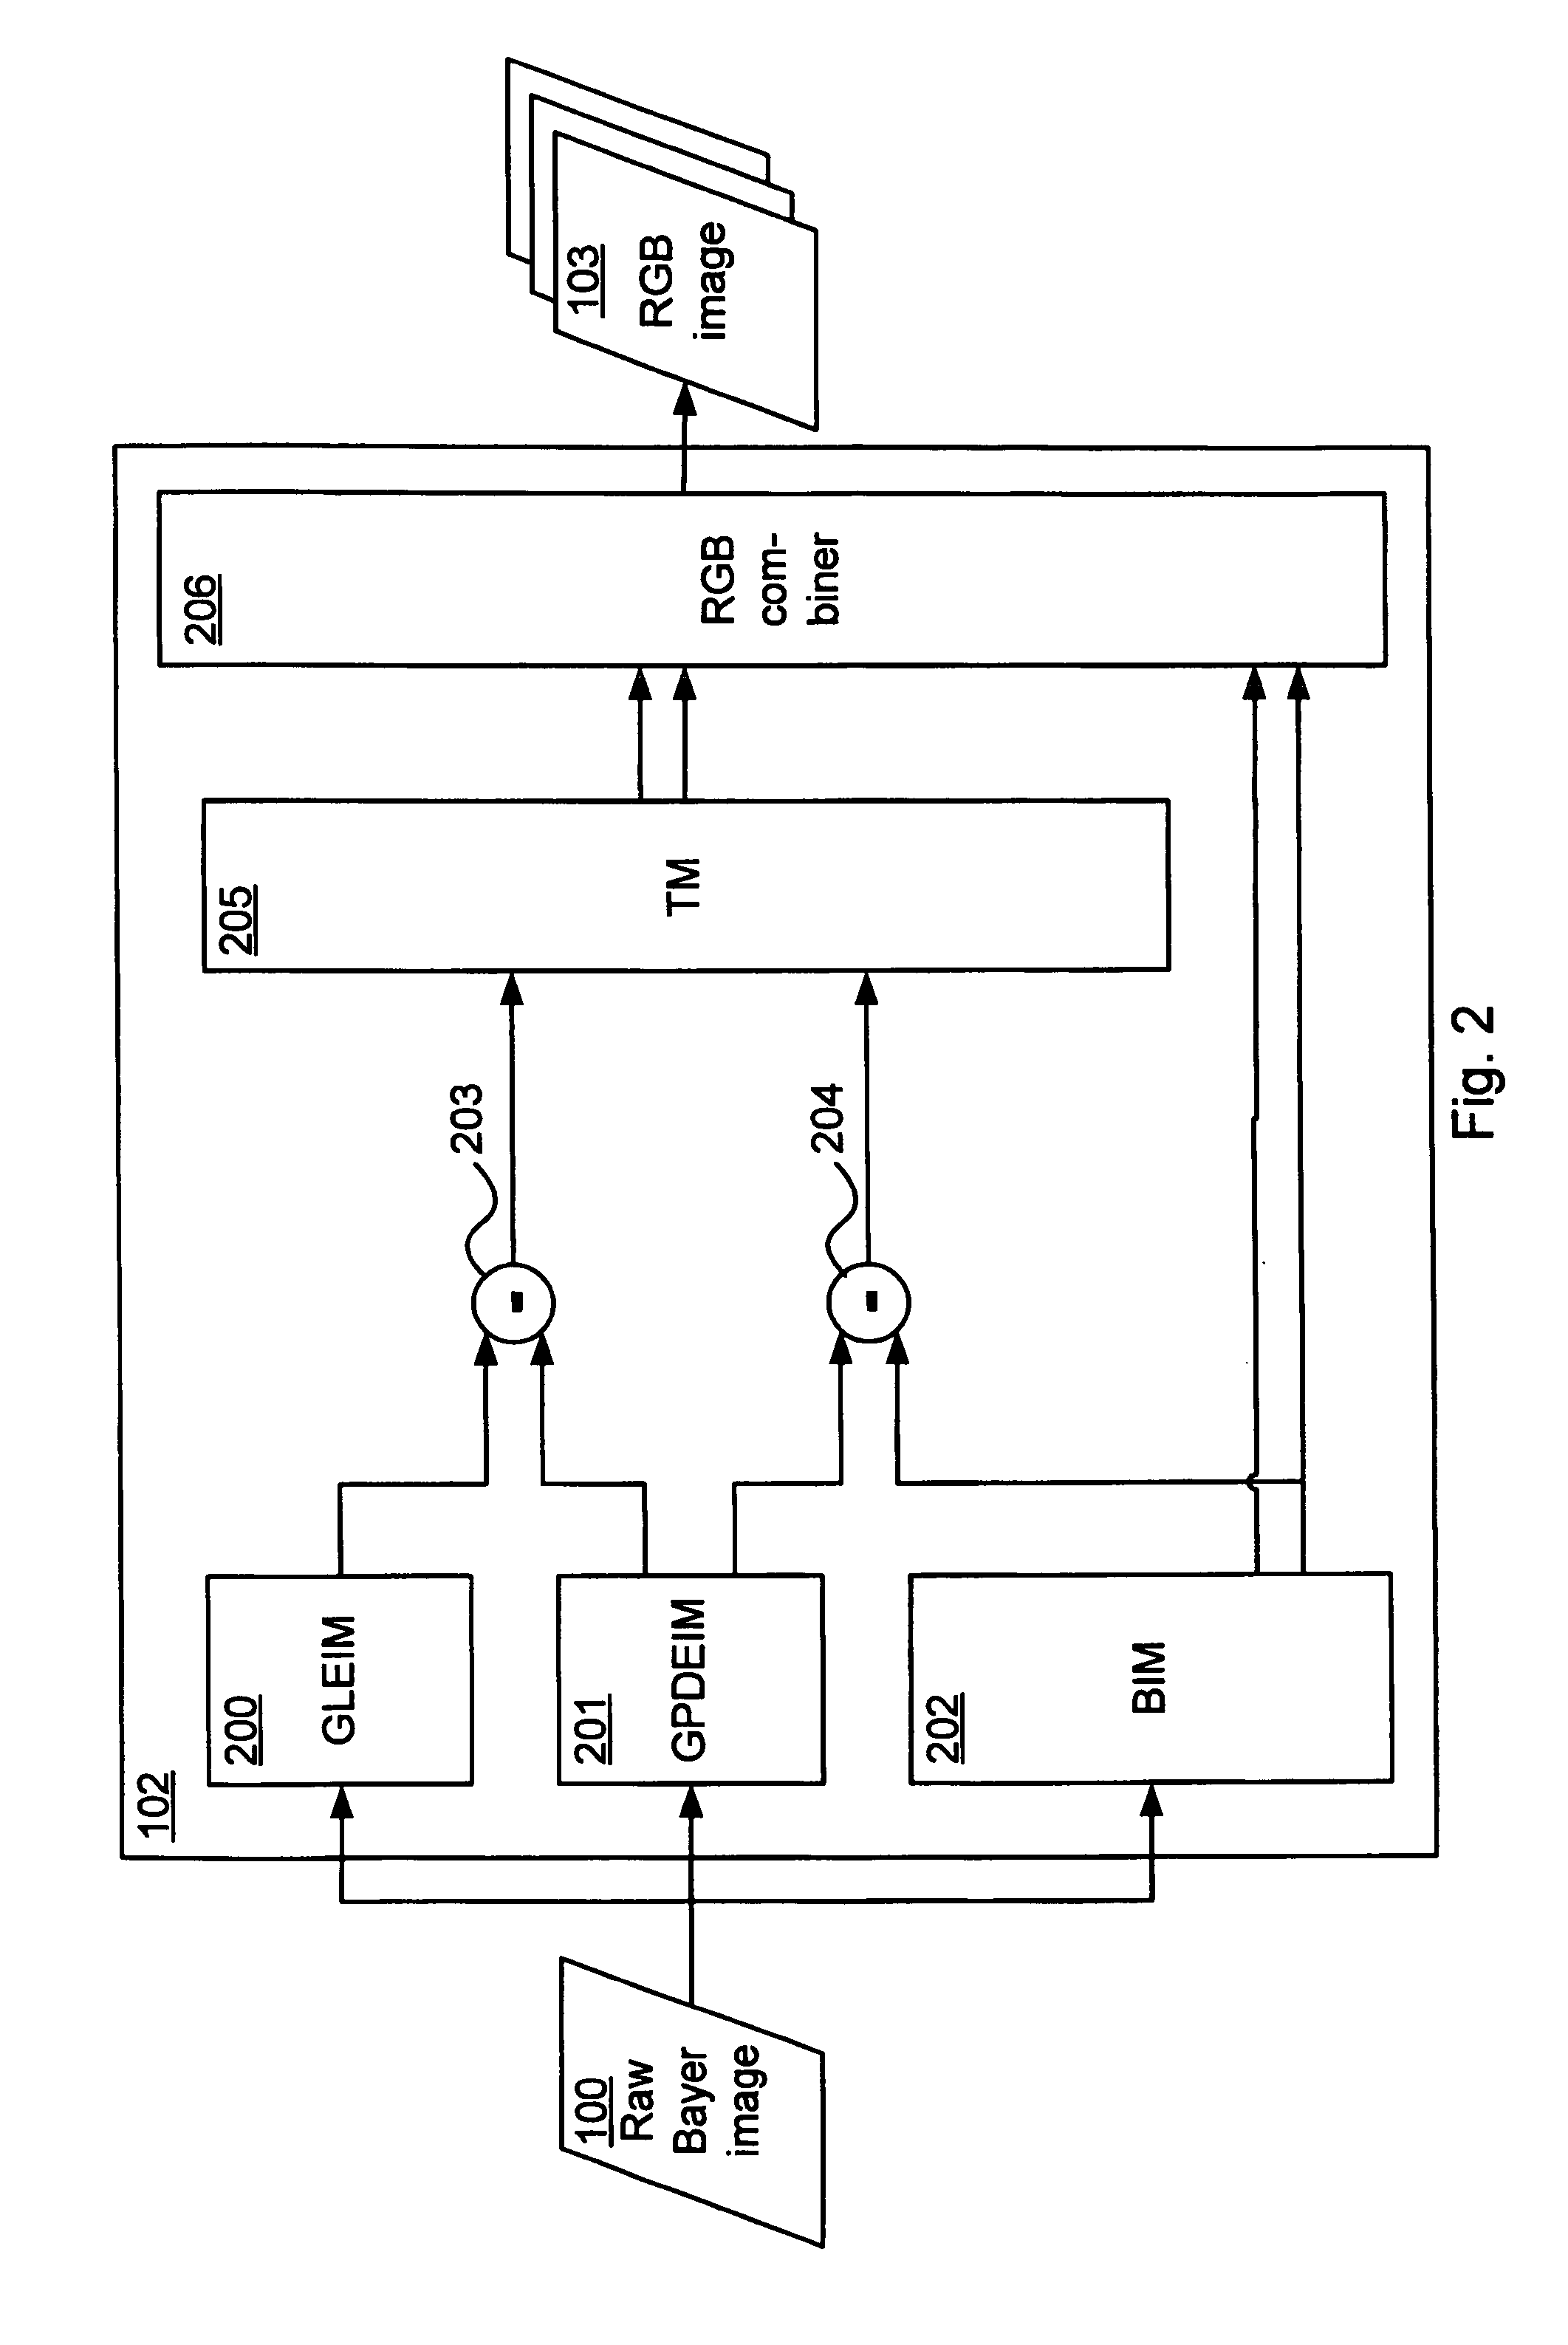 Methods and devices for image processing, image capturing and image downscaling